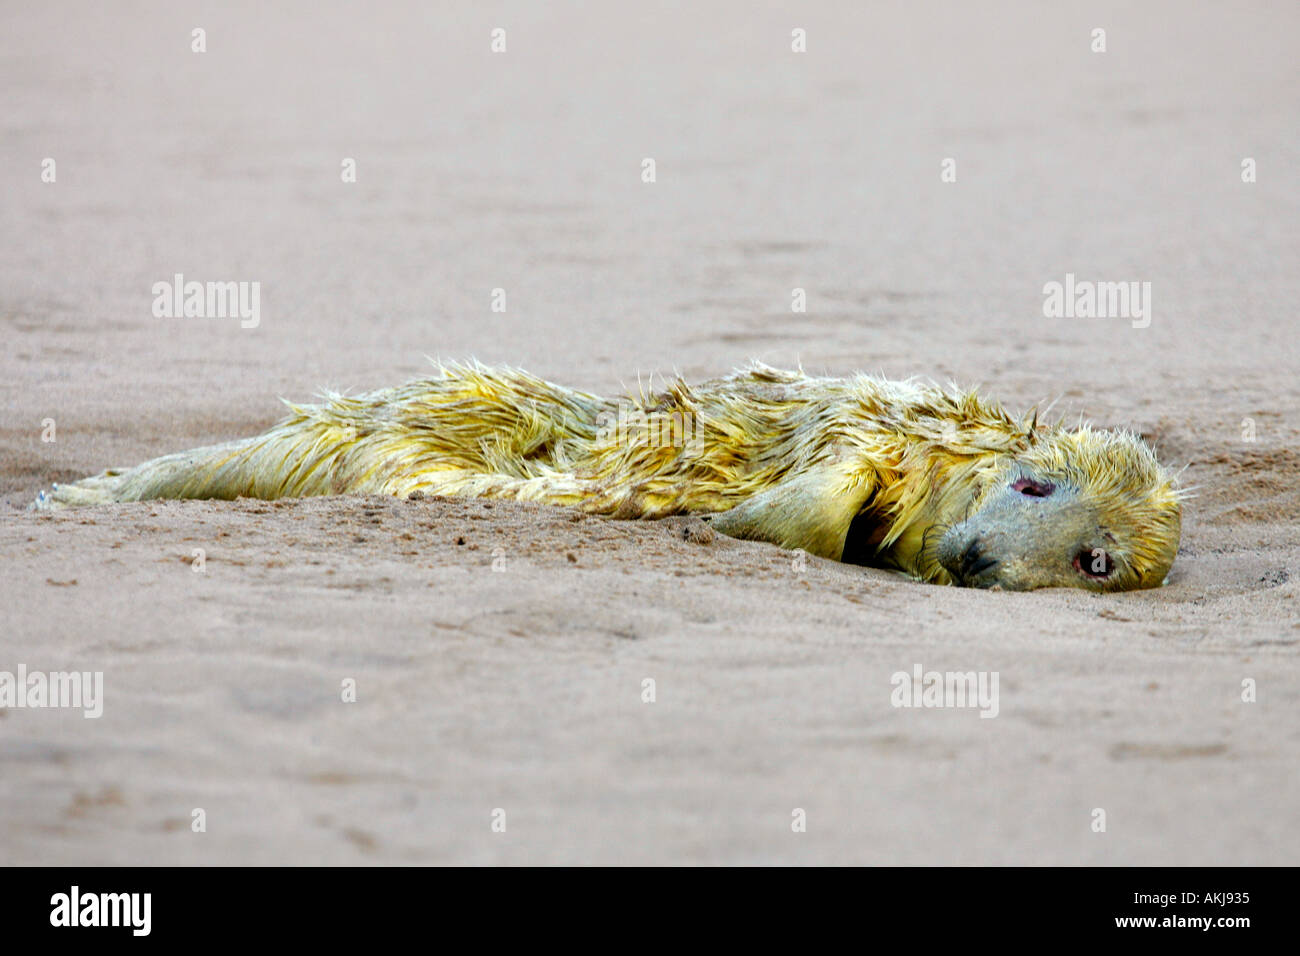 Grey seal Halichoerus grypus Dead Pup on sand bar Donna Nook lincolnshire Stock Photo